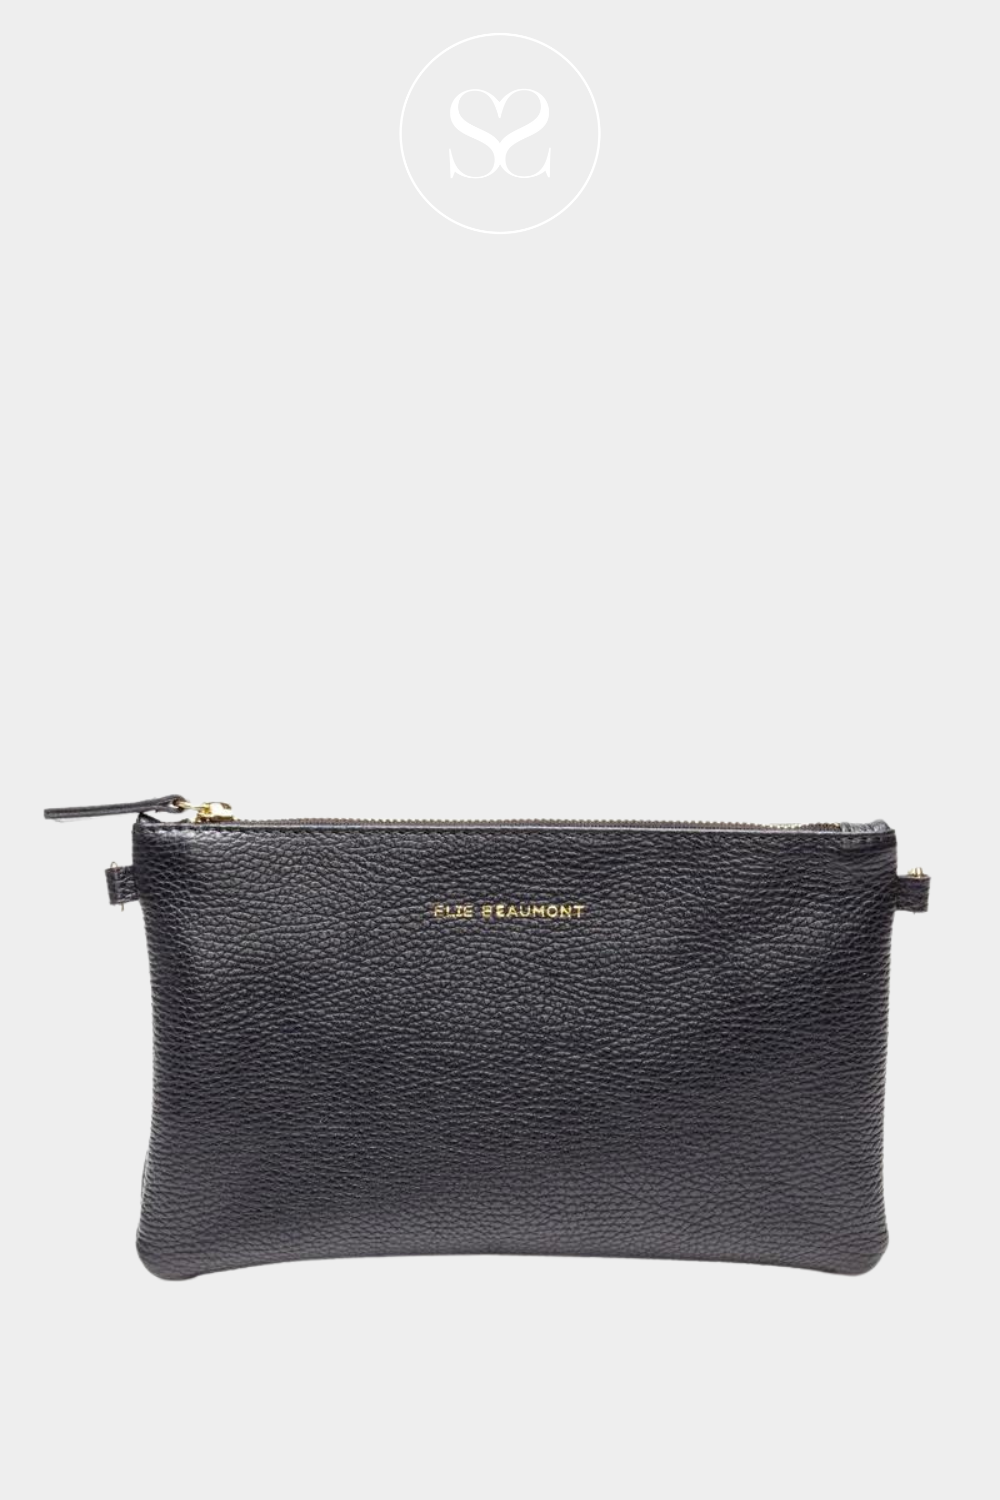 elie beaumont slimline pouch bag in black leather